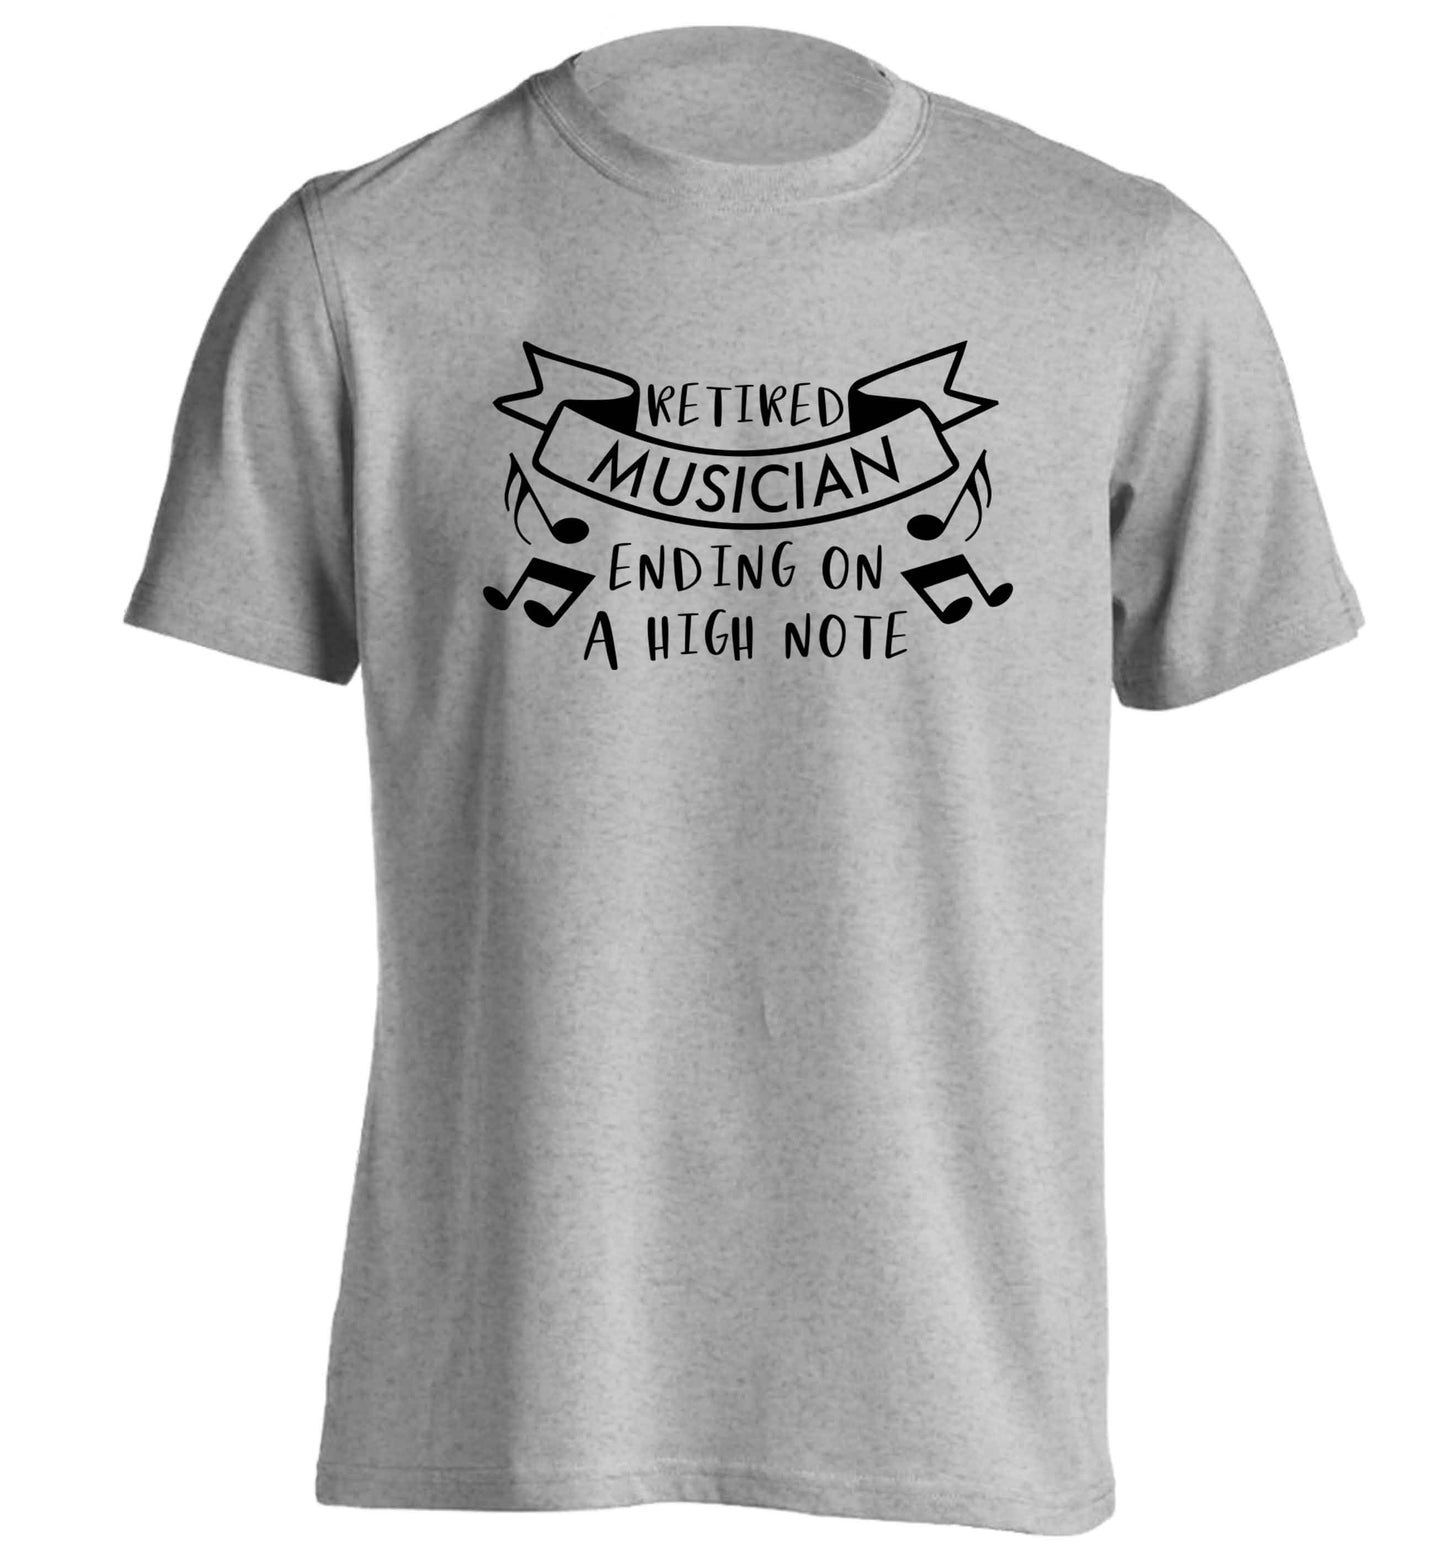 Retired musician ending on a high note adults unisex grey Tshirt 2XL